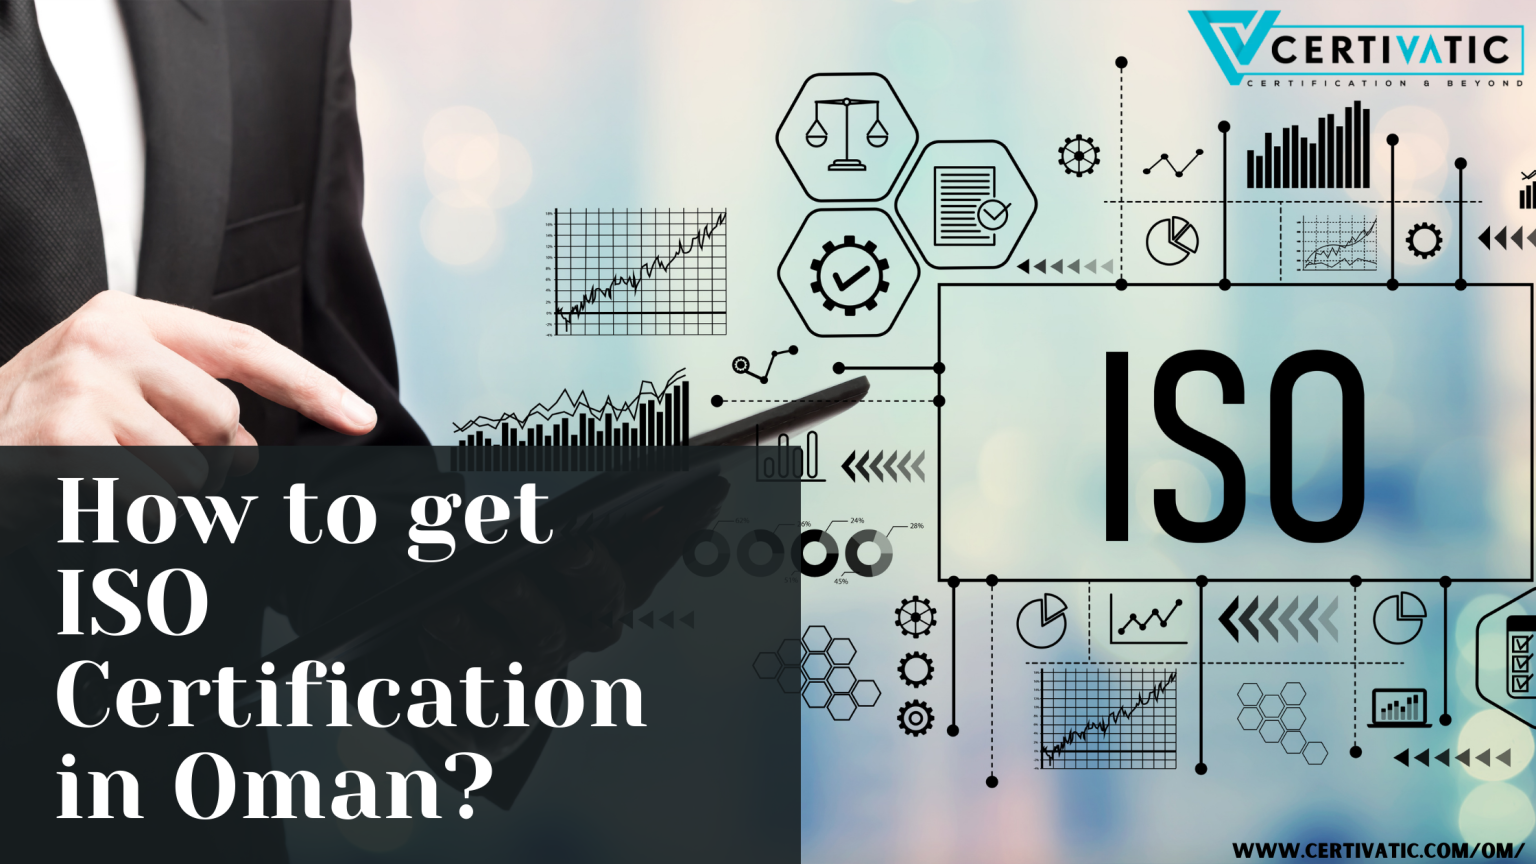 How to get ISO Certification in Oman?